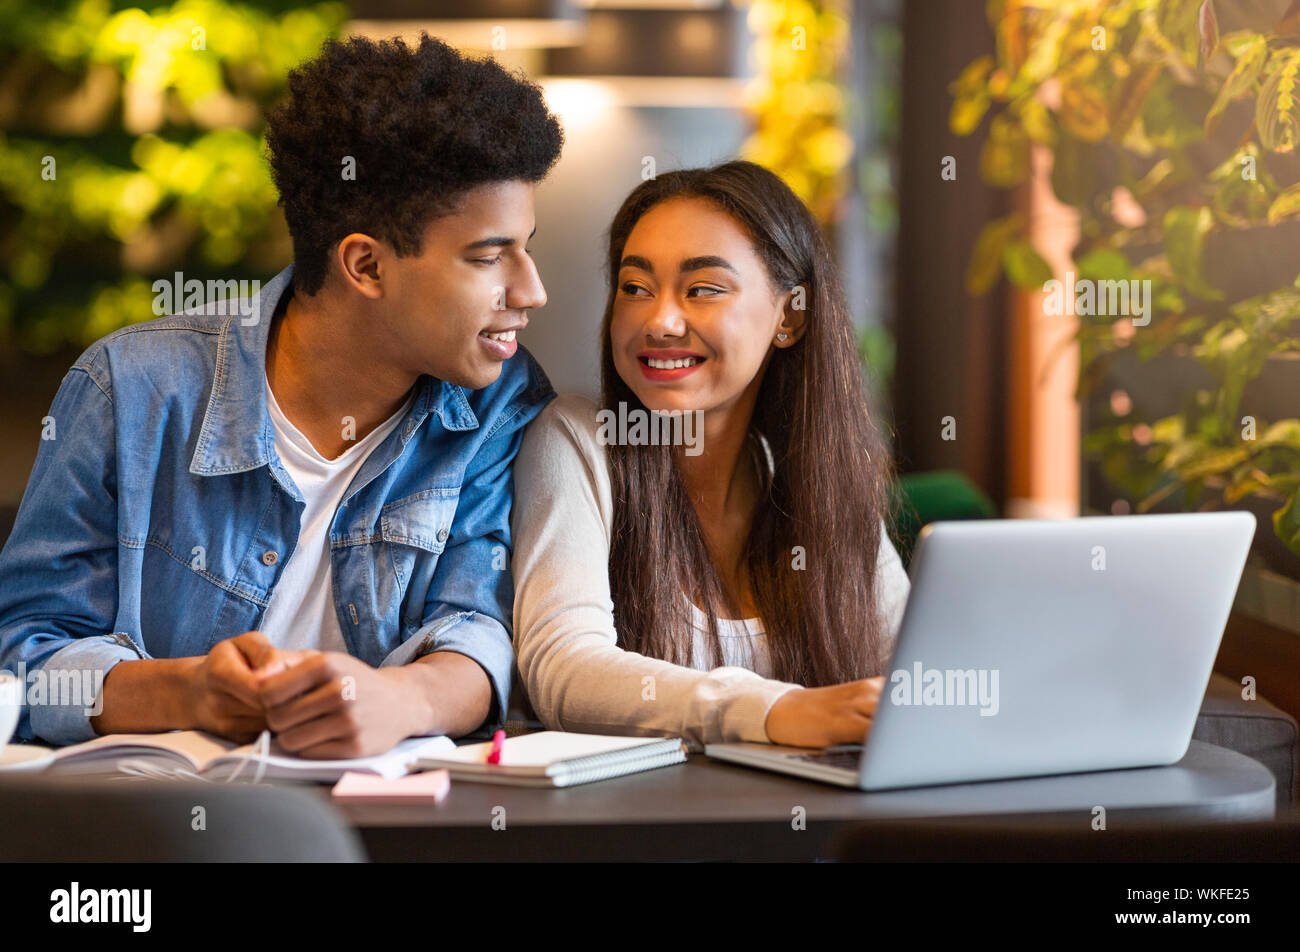 Studying students looking at each other and smiling Stock Photo